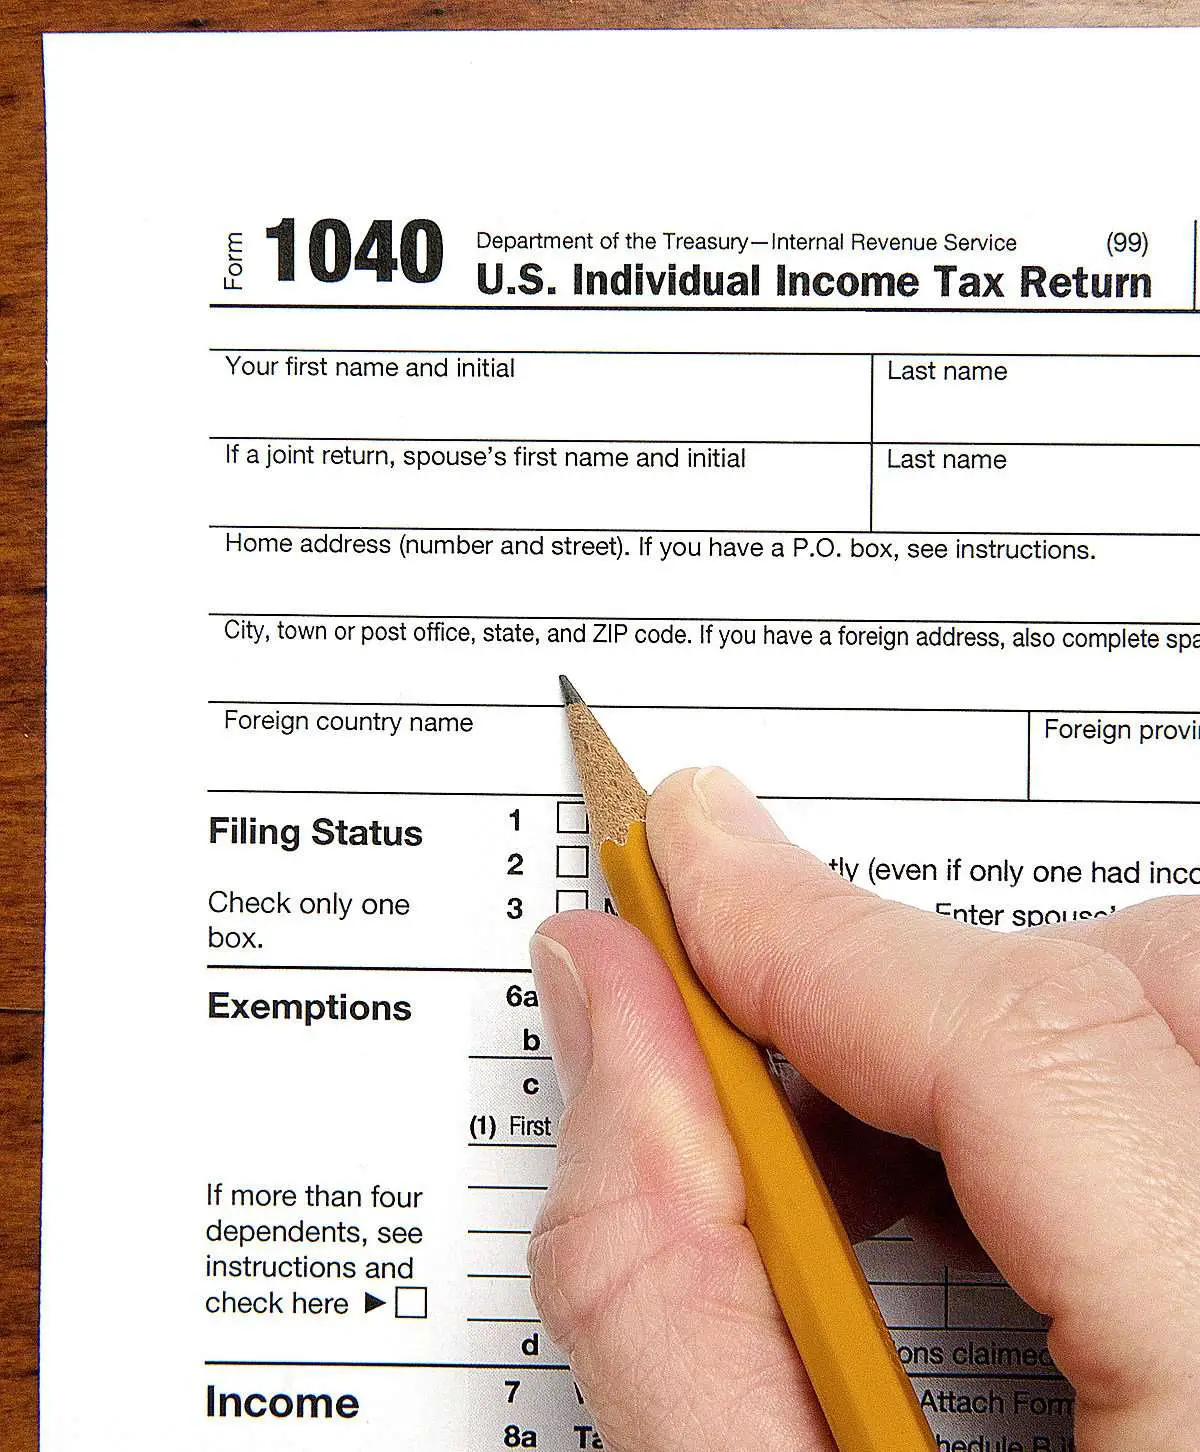 File Your Tax Return Even if You Canât Pay What You Owe Now